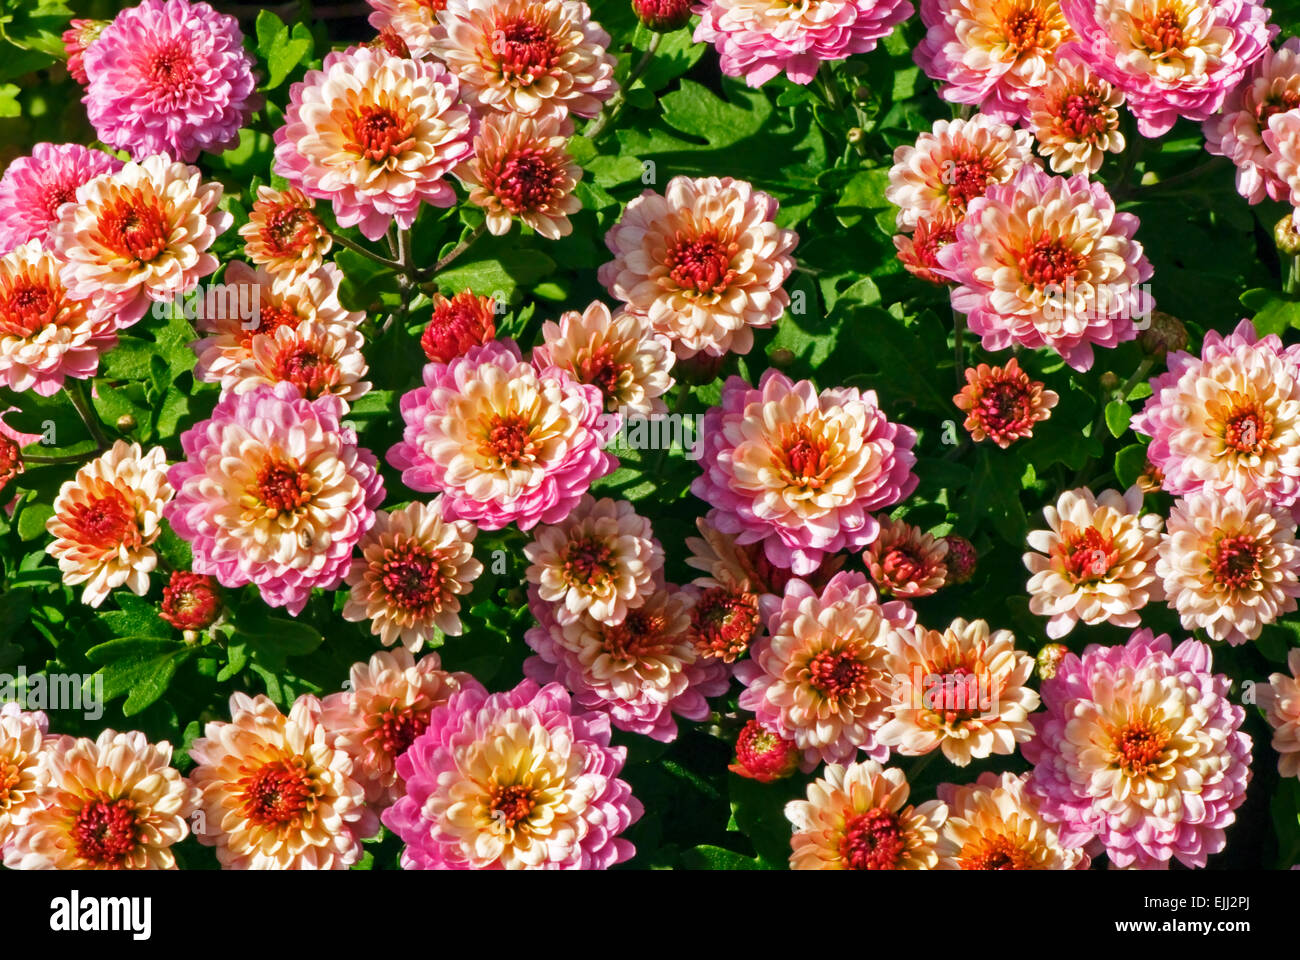 A group of orange and pink chrysanthemums bask in the bright sunlight of a fall day. Stock Photo